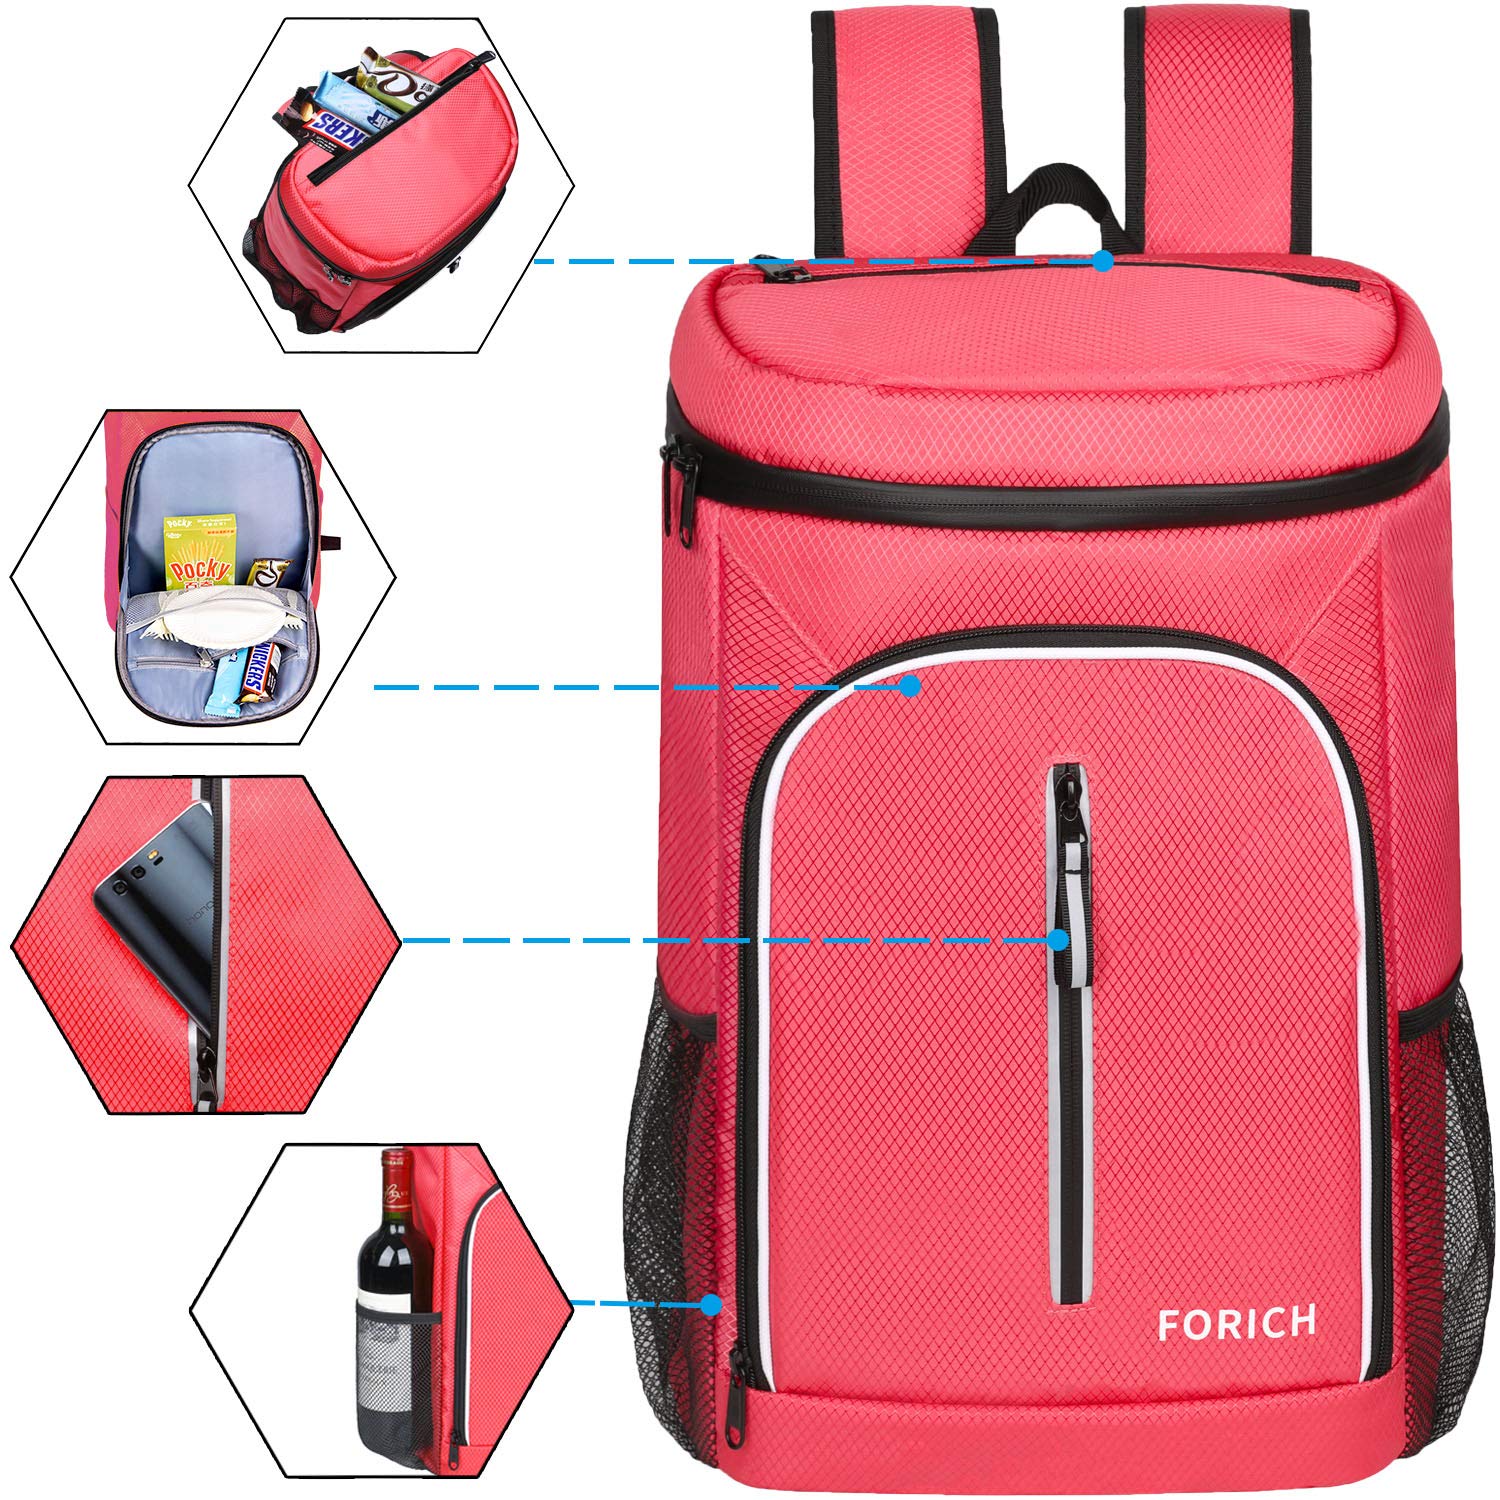 FORICH Soft Cooler Backpack Insulated Waterproof Backpack Cooler Bag Leak Proof Portable Cooler Backpacks to Work Lunch Travel Beach Camping Hiking Picnic Fishing Beer for Men Women